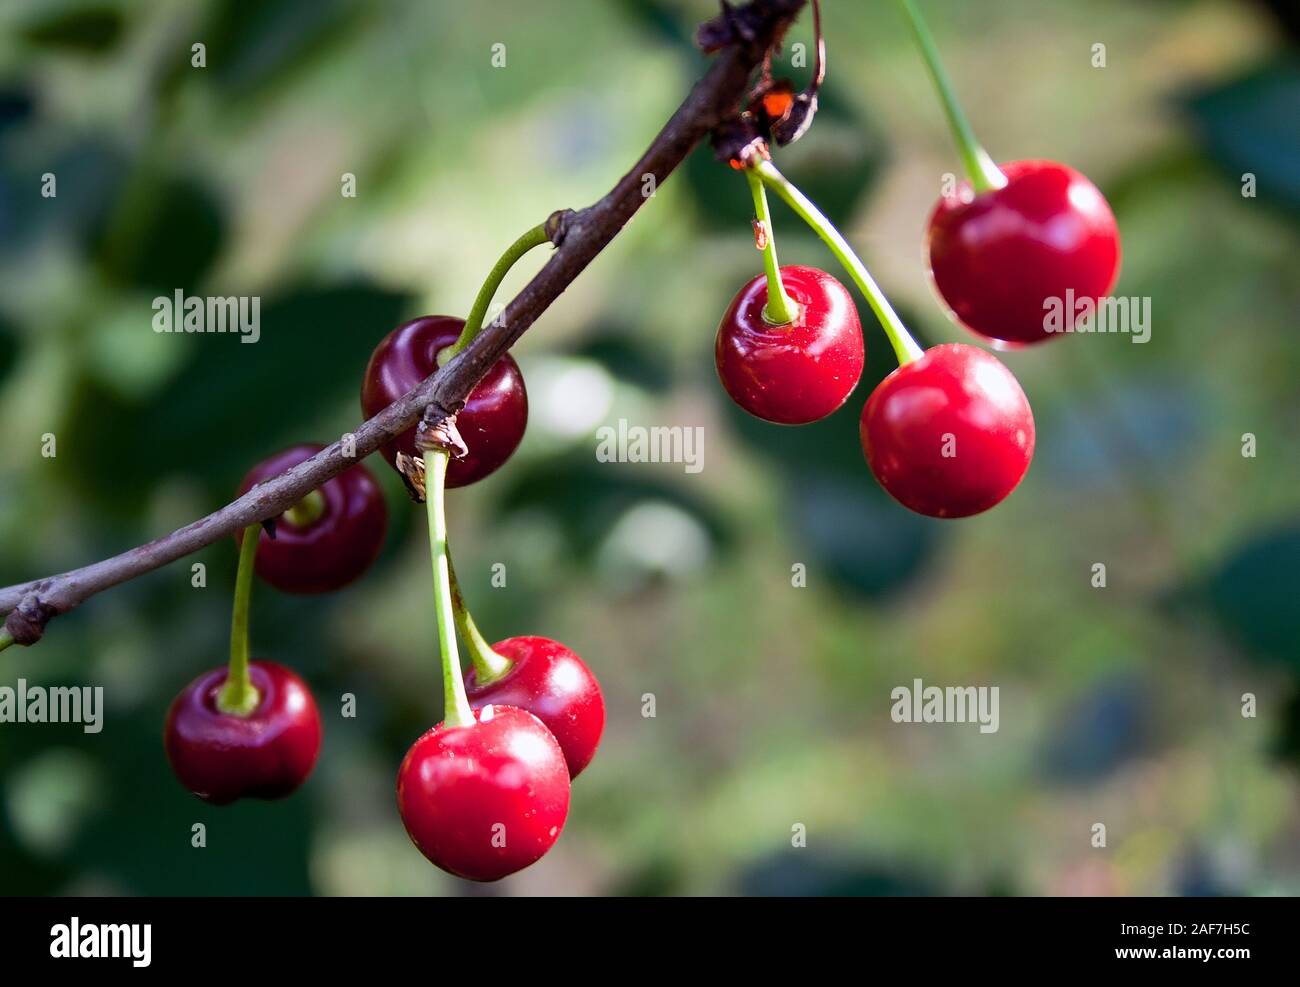 Ripe cherries hanging from a cherry tree branch before harvest in early summer, close up. Stock Photo